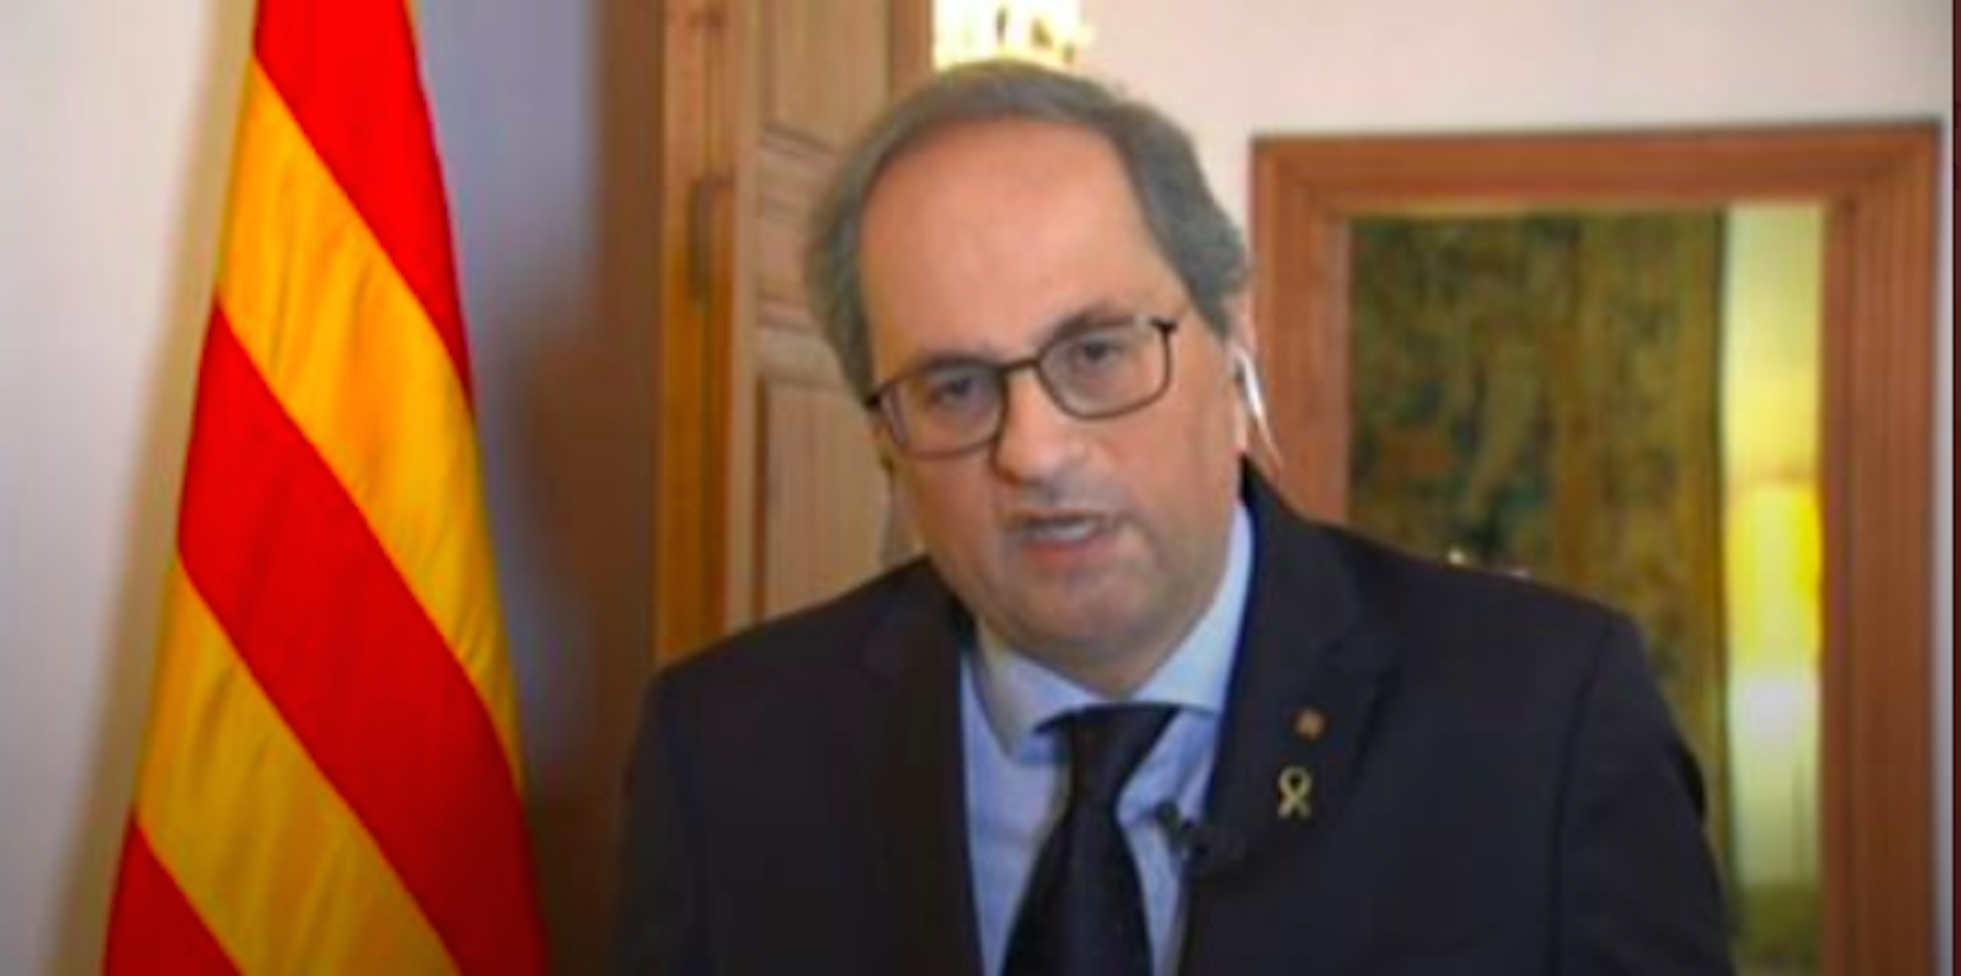 Torra makes Sánchez responsible for the consequences of the resumption of work